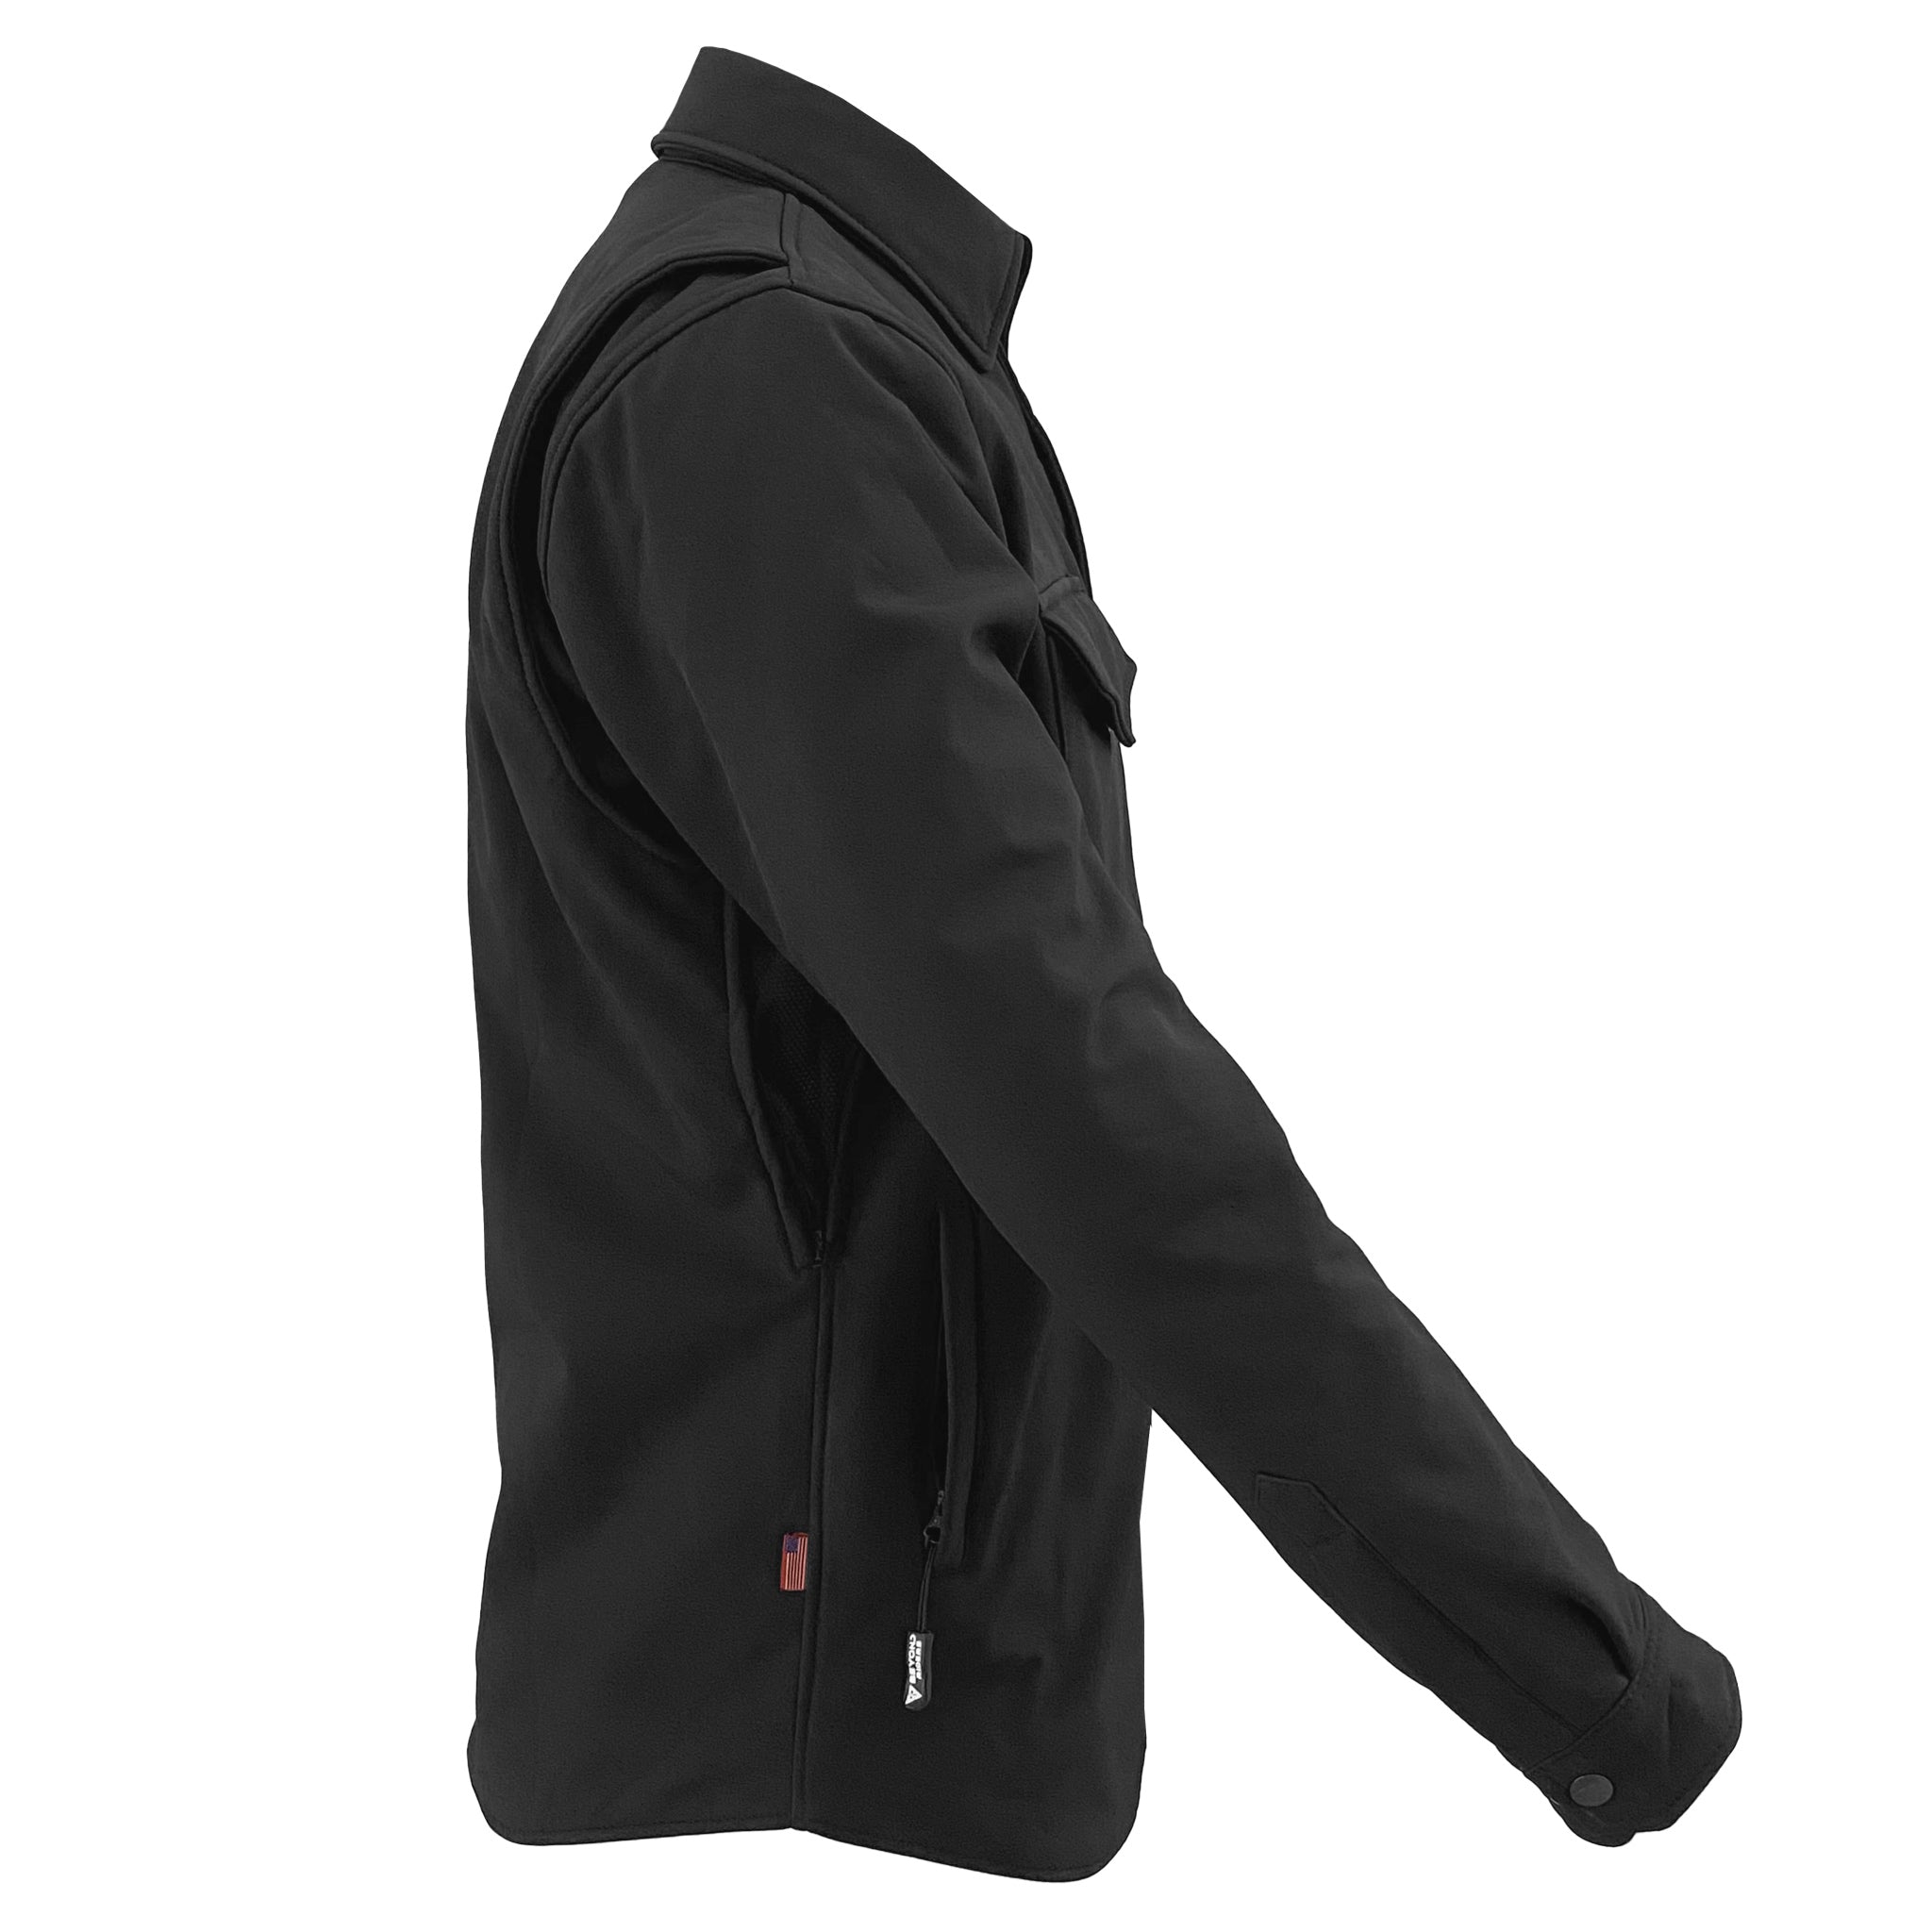 Protective SoftShell Winter Jacket for Men - Black Matte with Pads